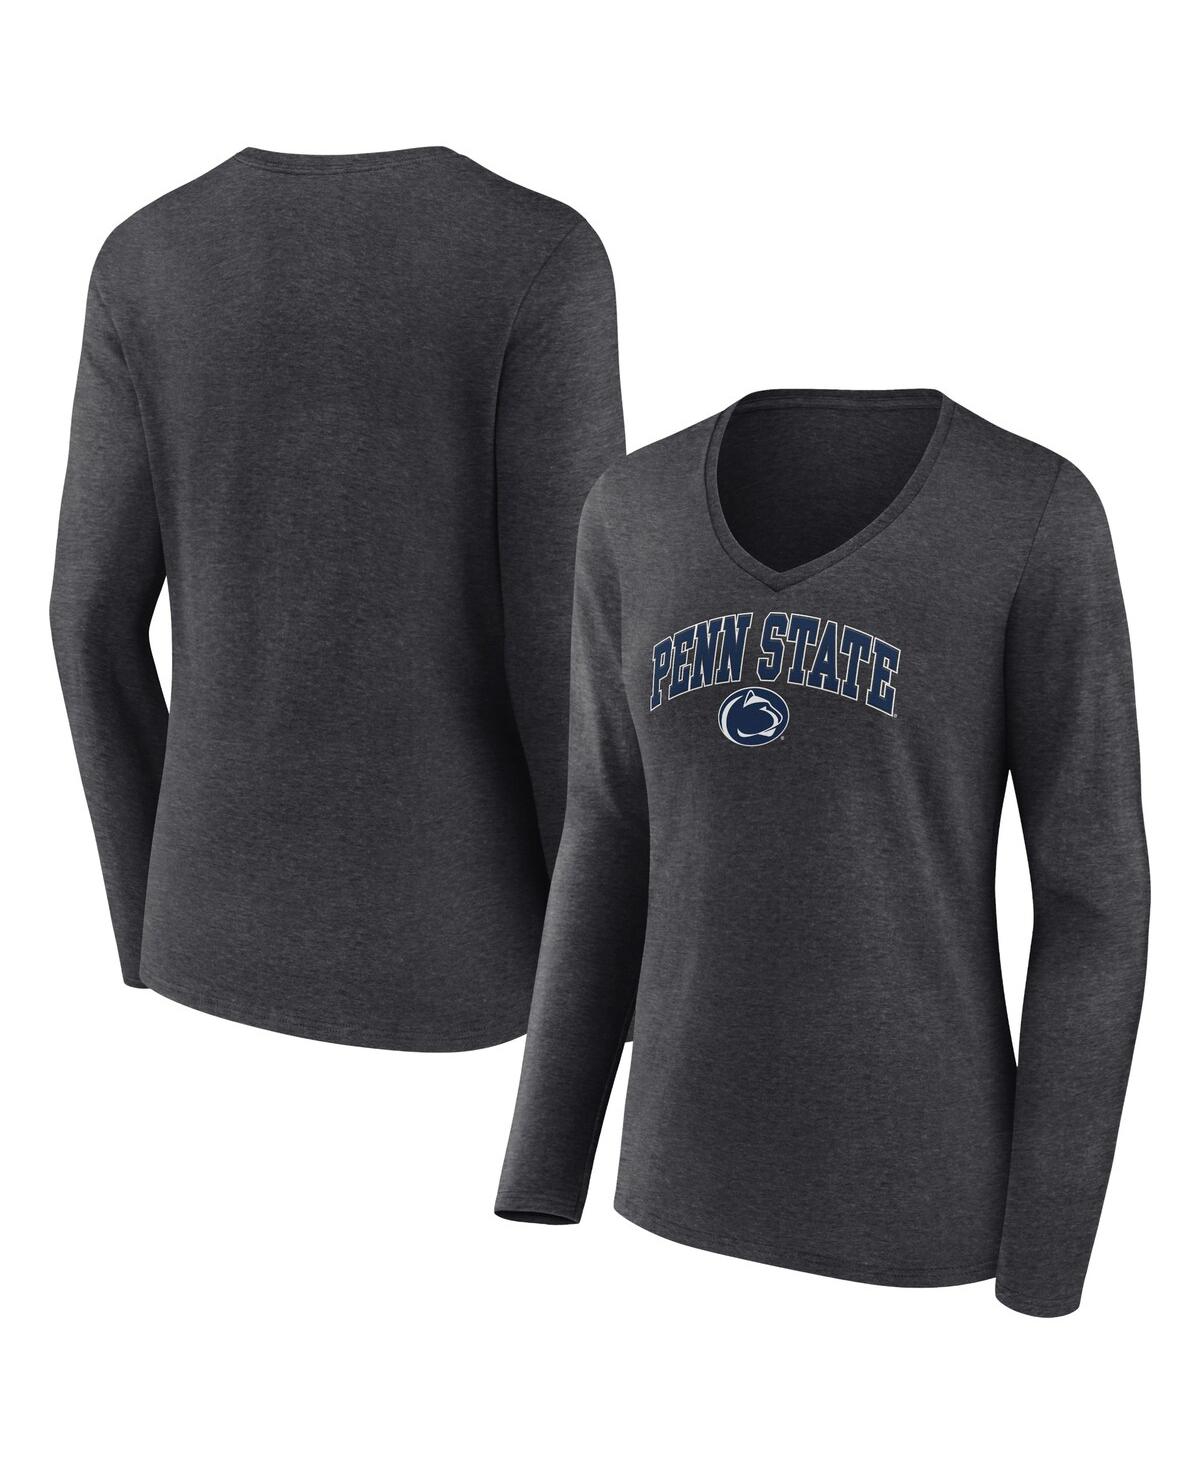 Women's Fanatics Heather Charcoal Penn State Nittany Lions Evergreen Campus Long Sleeve V-Neck T-shirt - Heather Charcoal